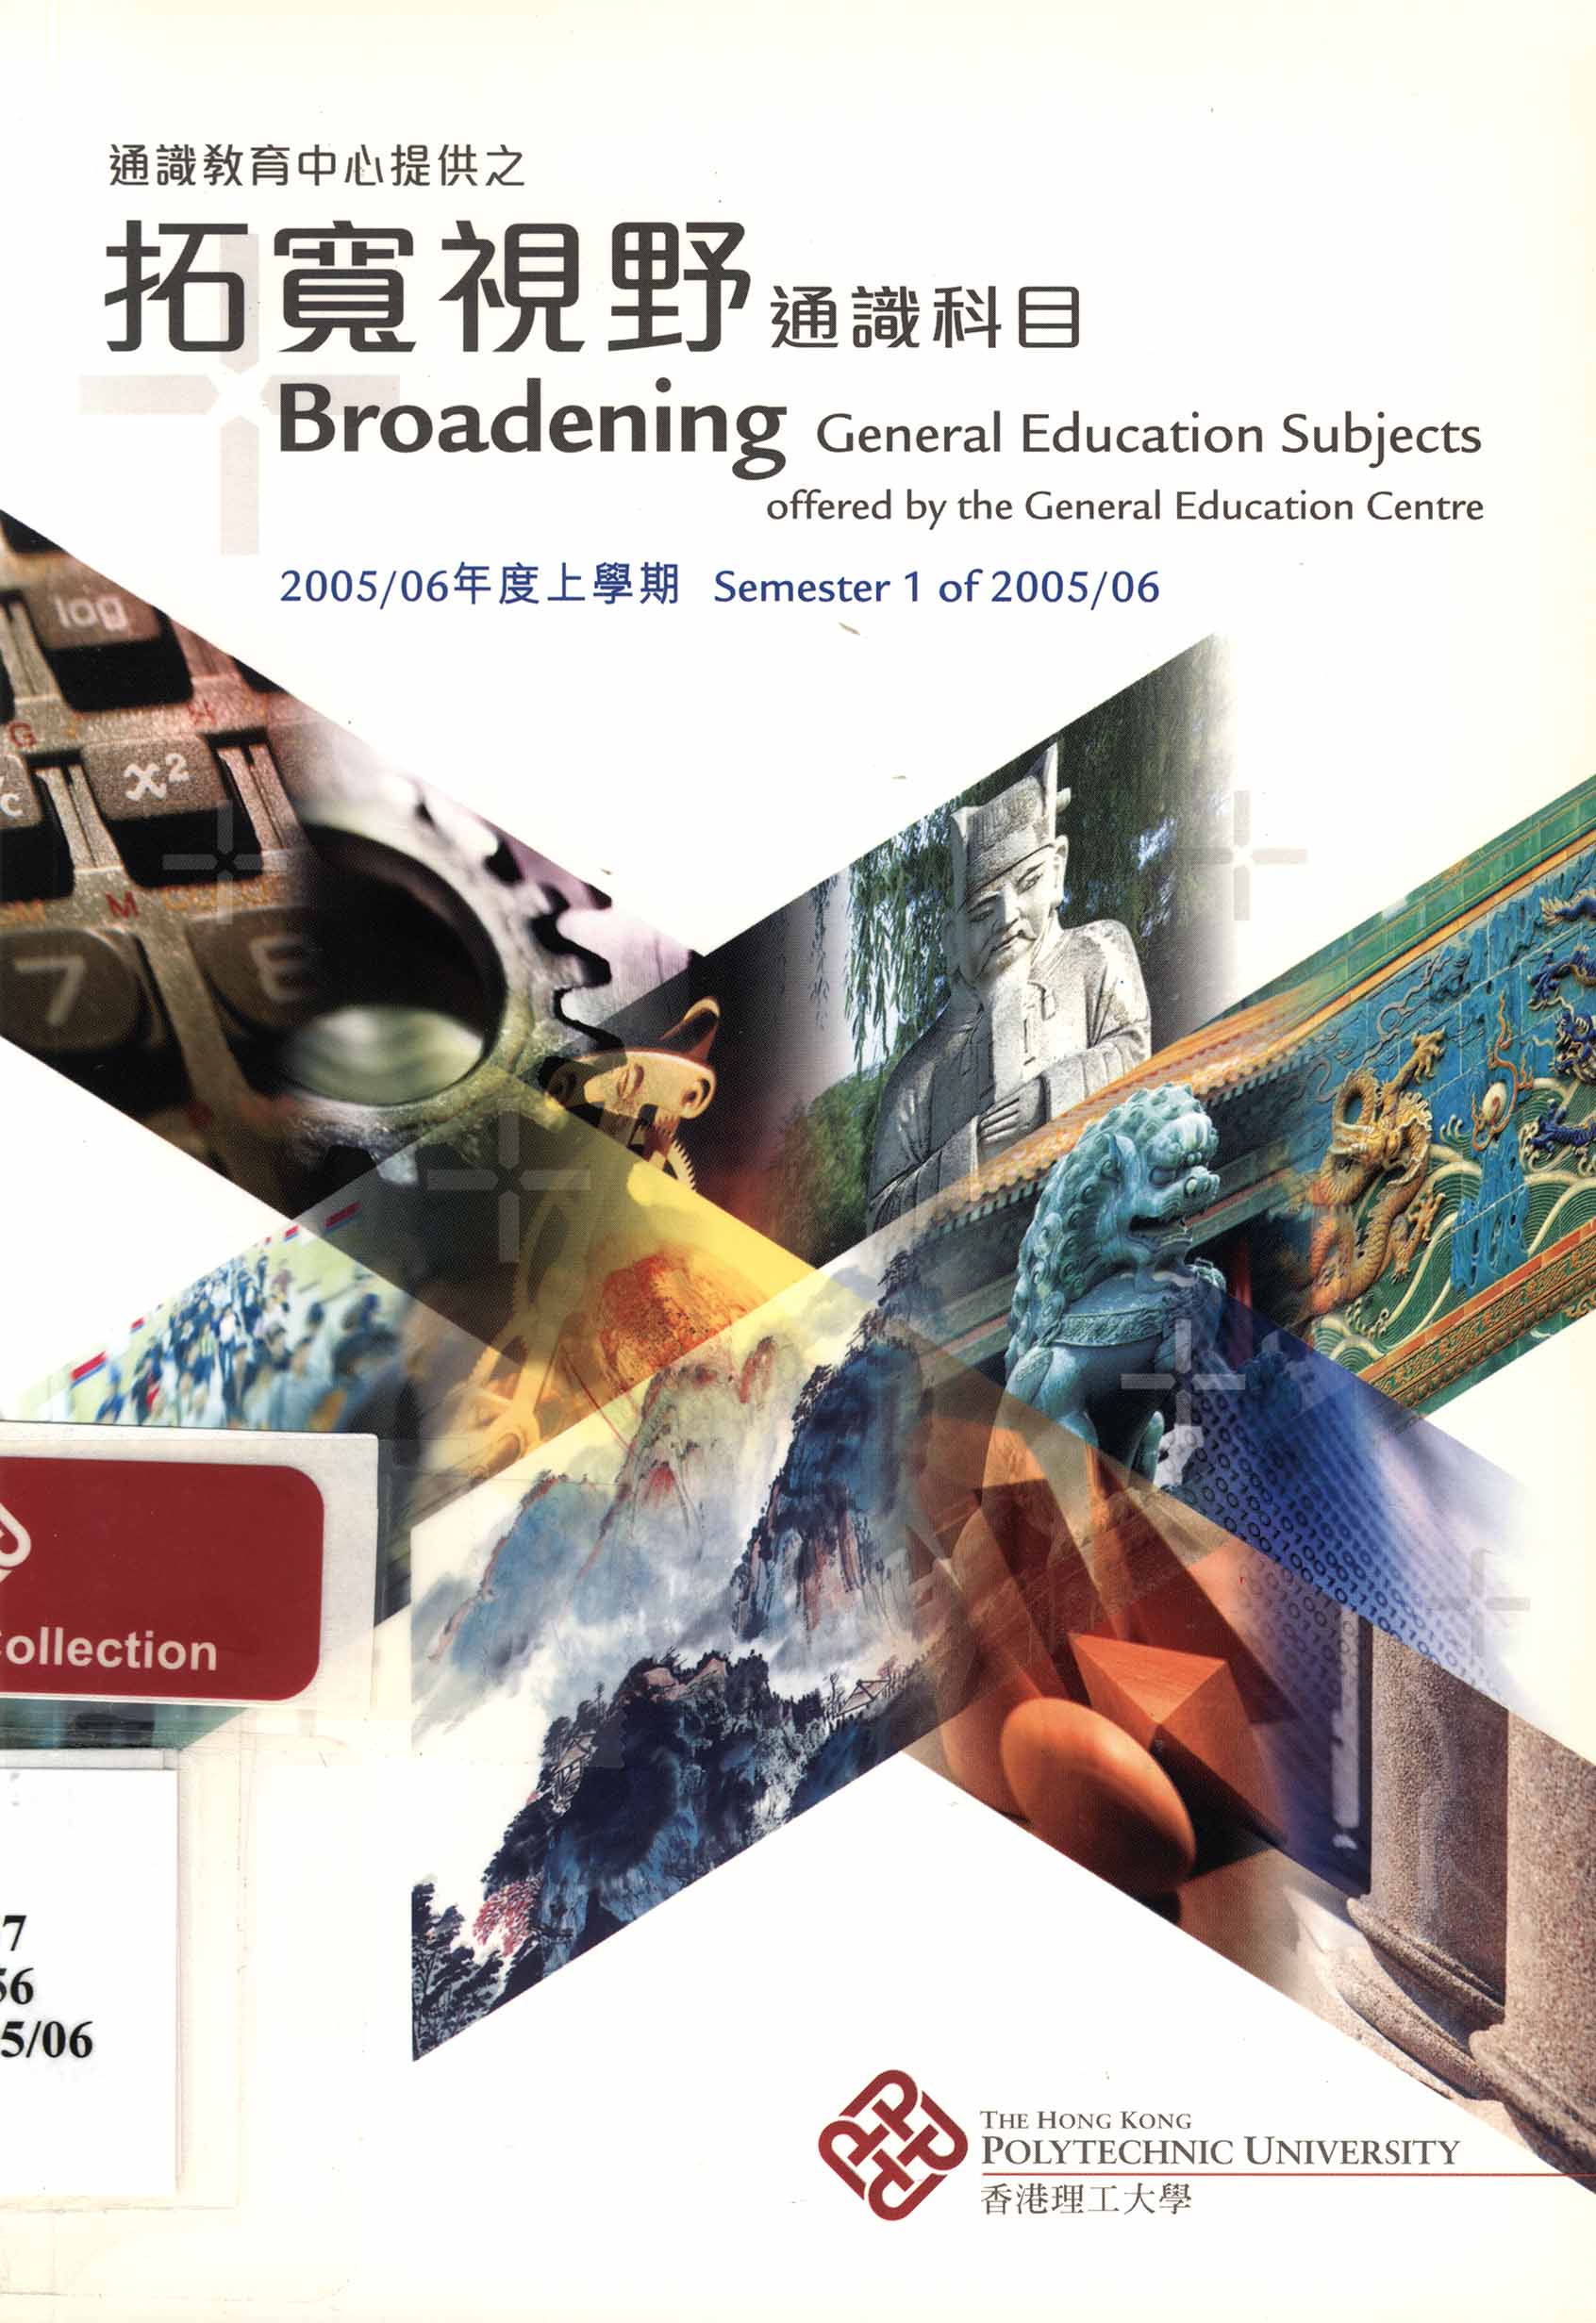 Broadening general education subjects offered by the General Education Centre [Semester 1 of 2005/06]